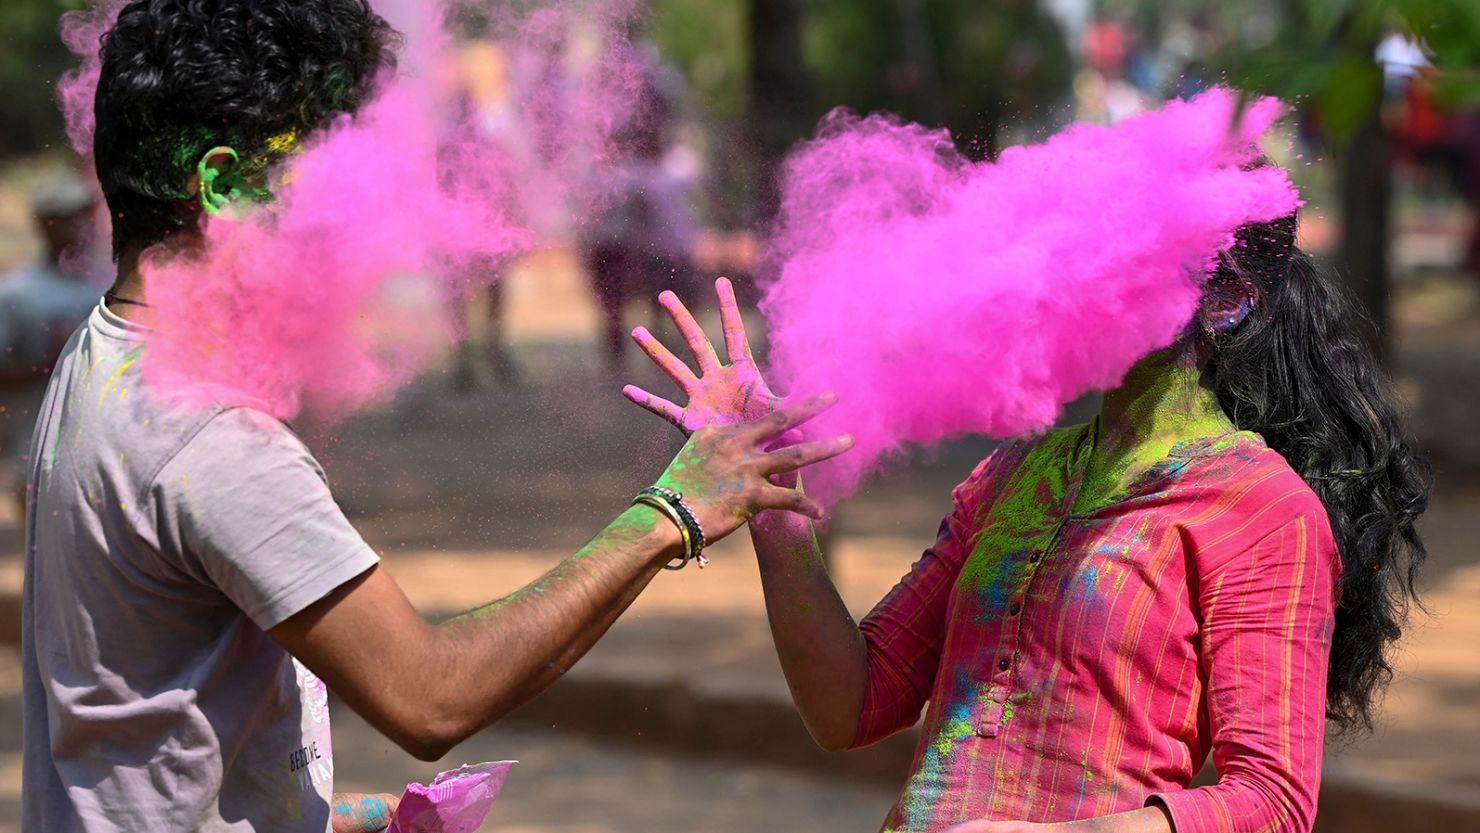 People throw "gulal," or colored powder, as part of Holi celebrations in Hyderabad on March 7, 2023.